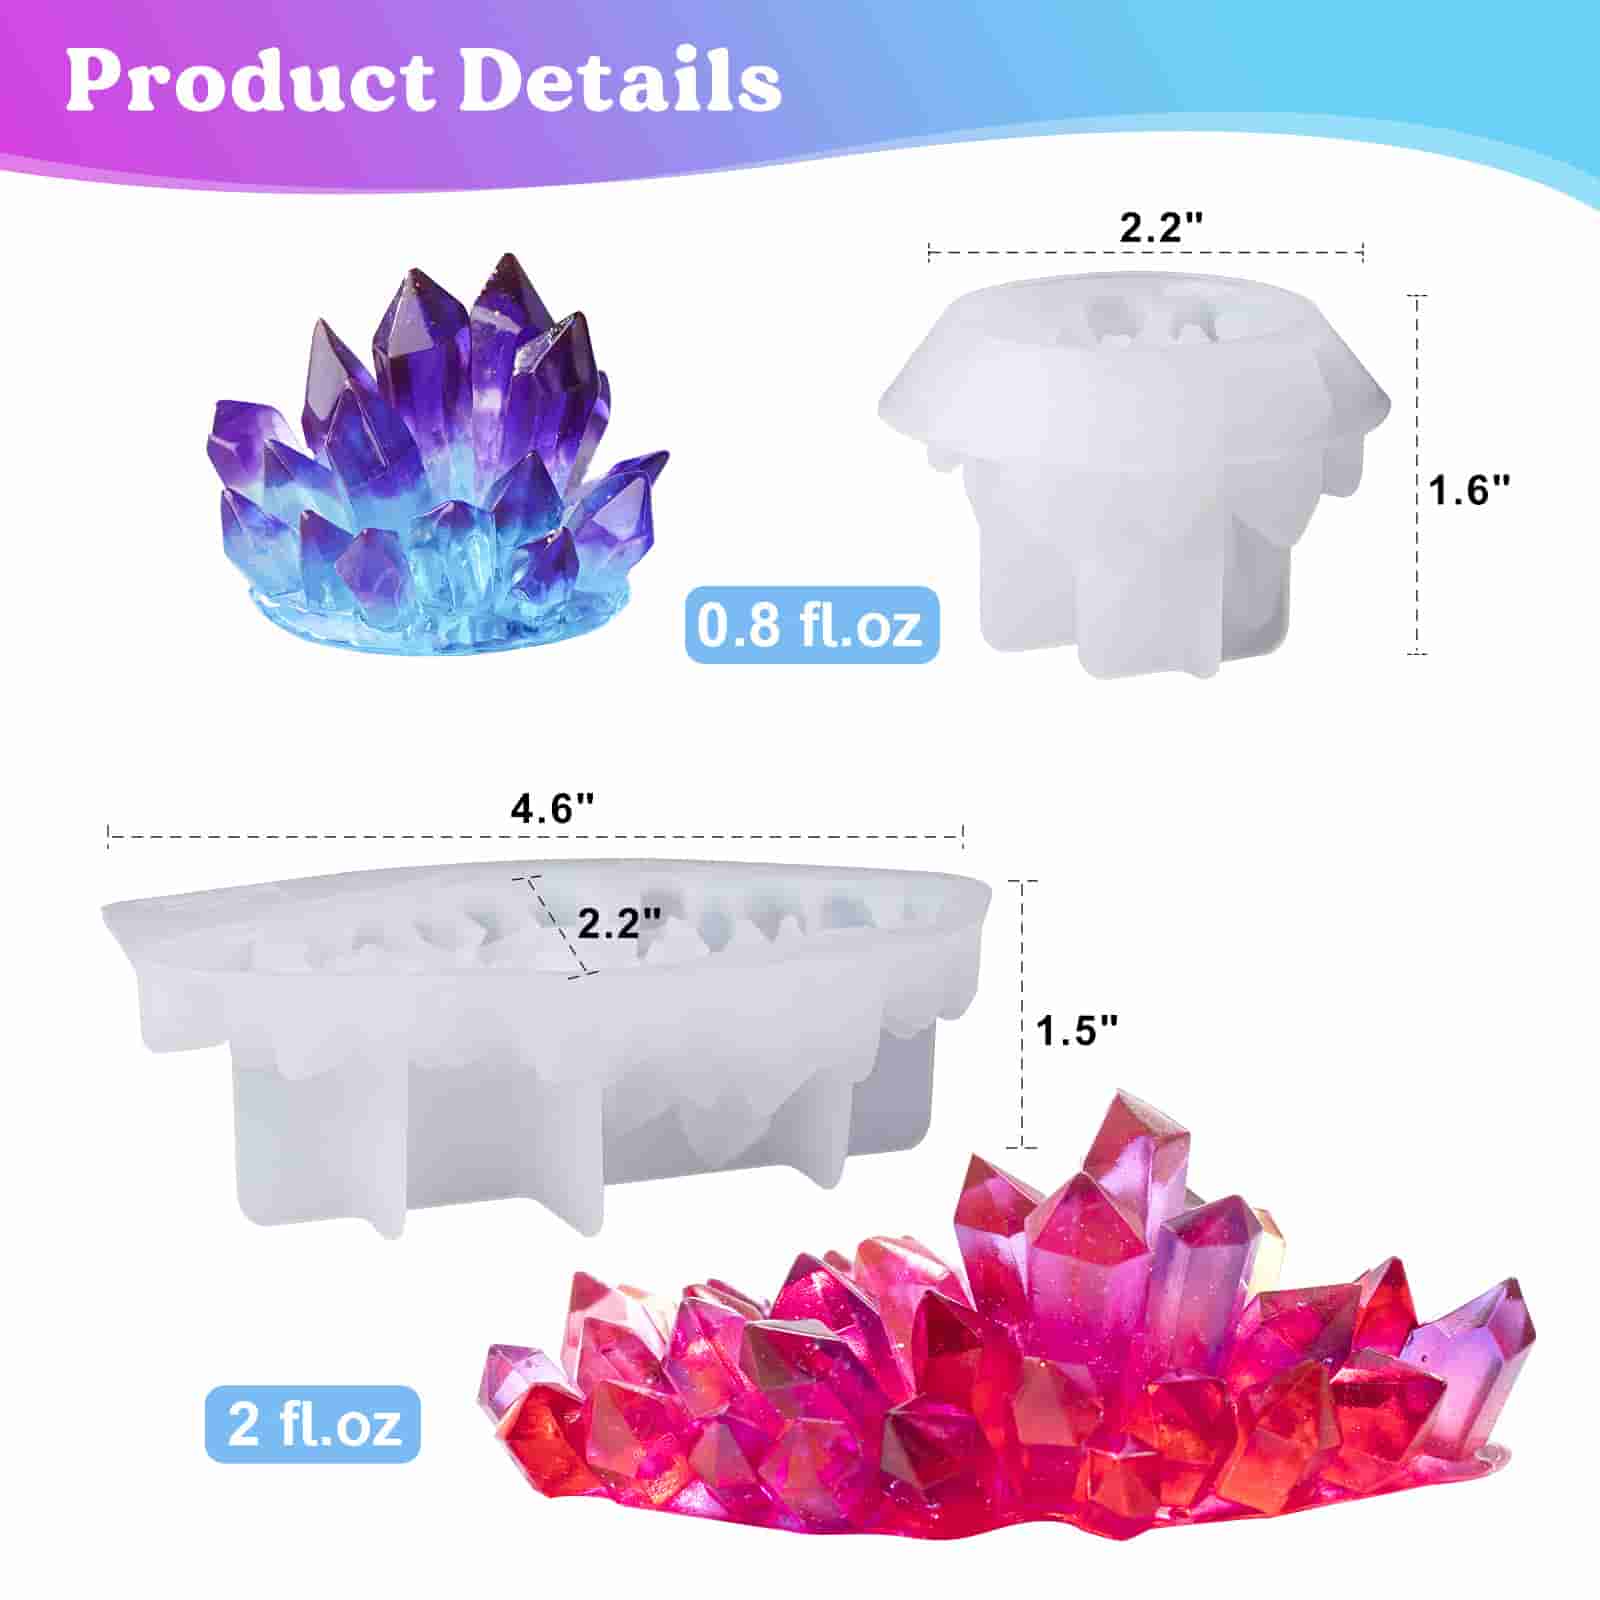 Crystal Cluster Resin Molds